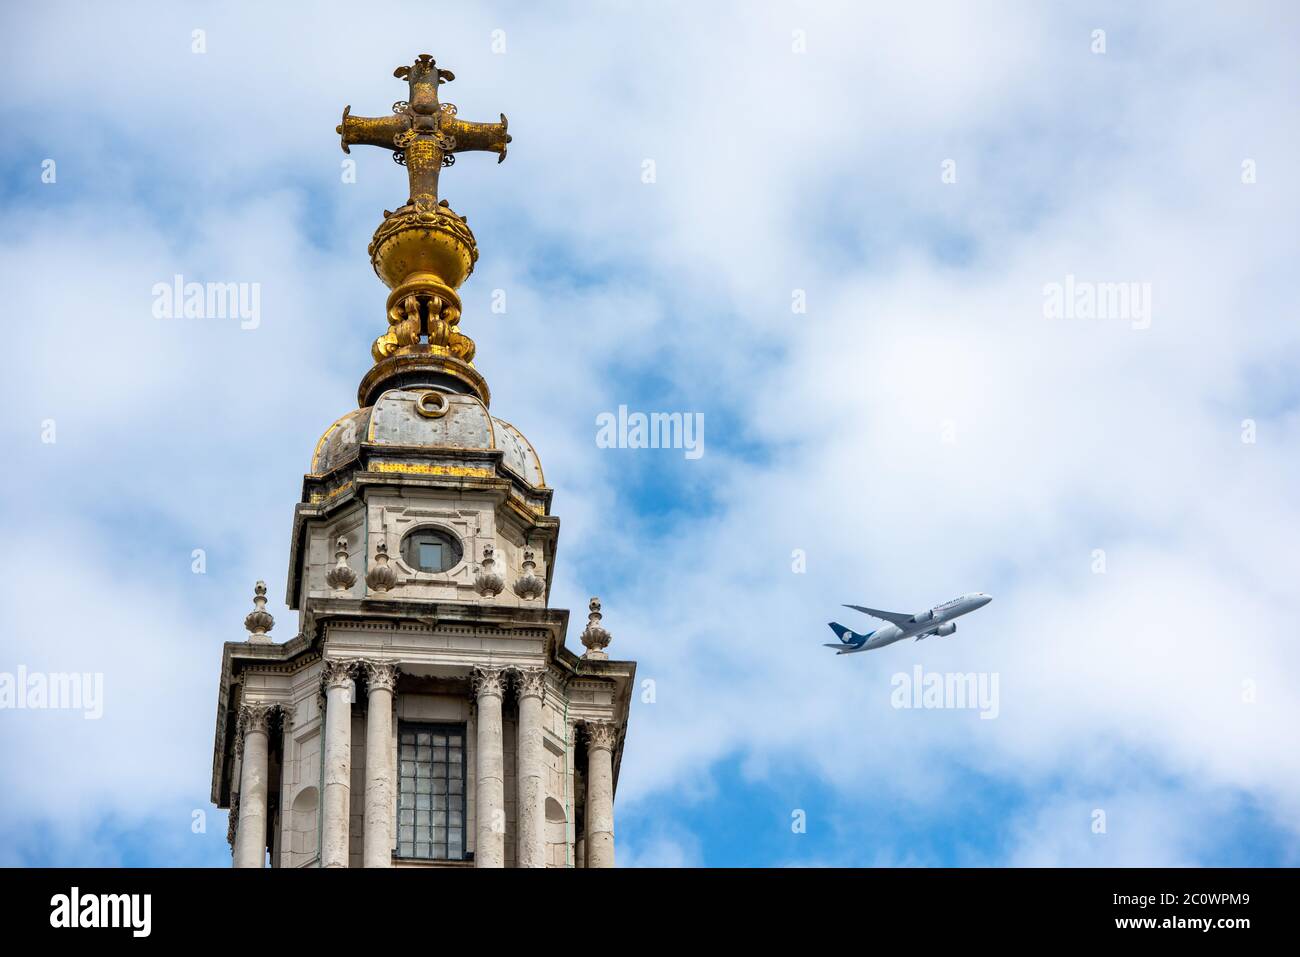 St Paul's Cathedral, London, England. Cross above the dome and aeroplane in sky. Stock Photo